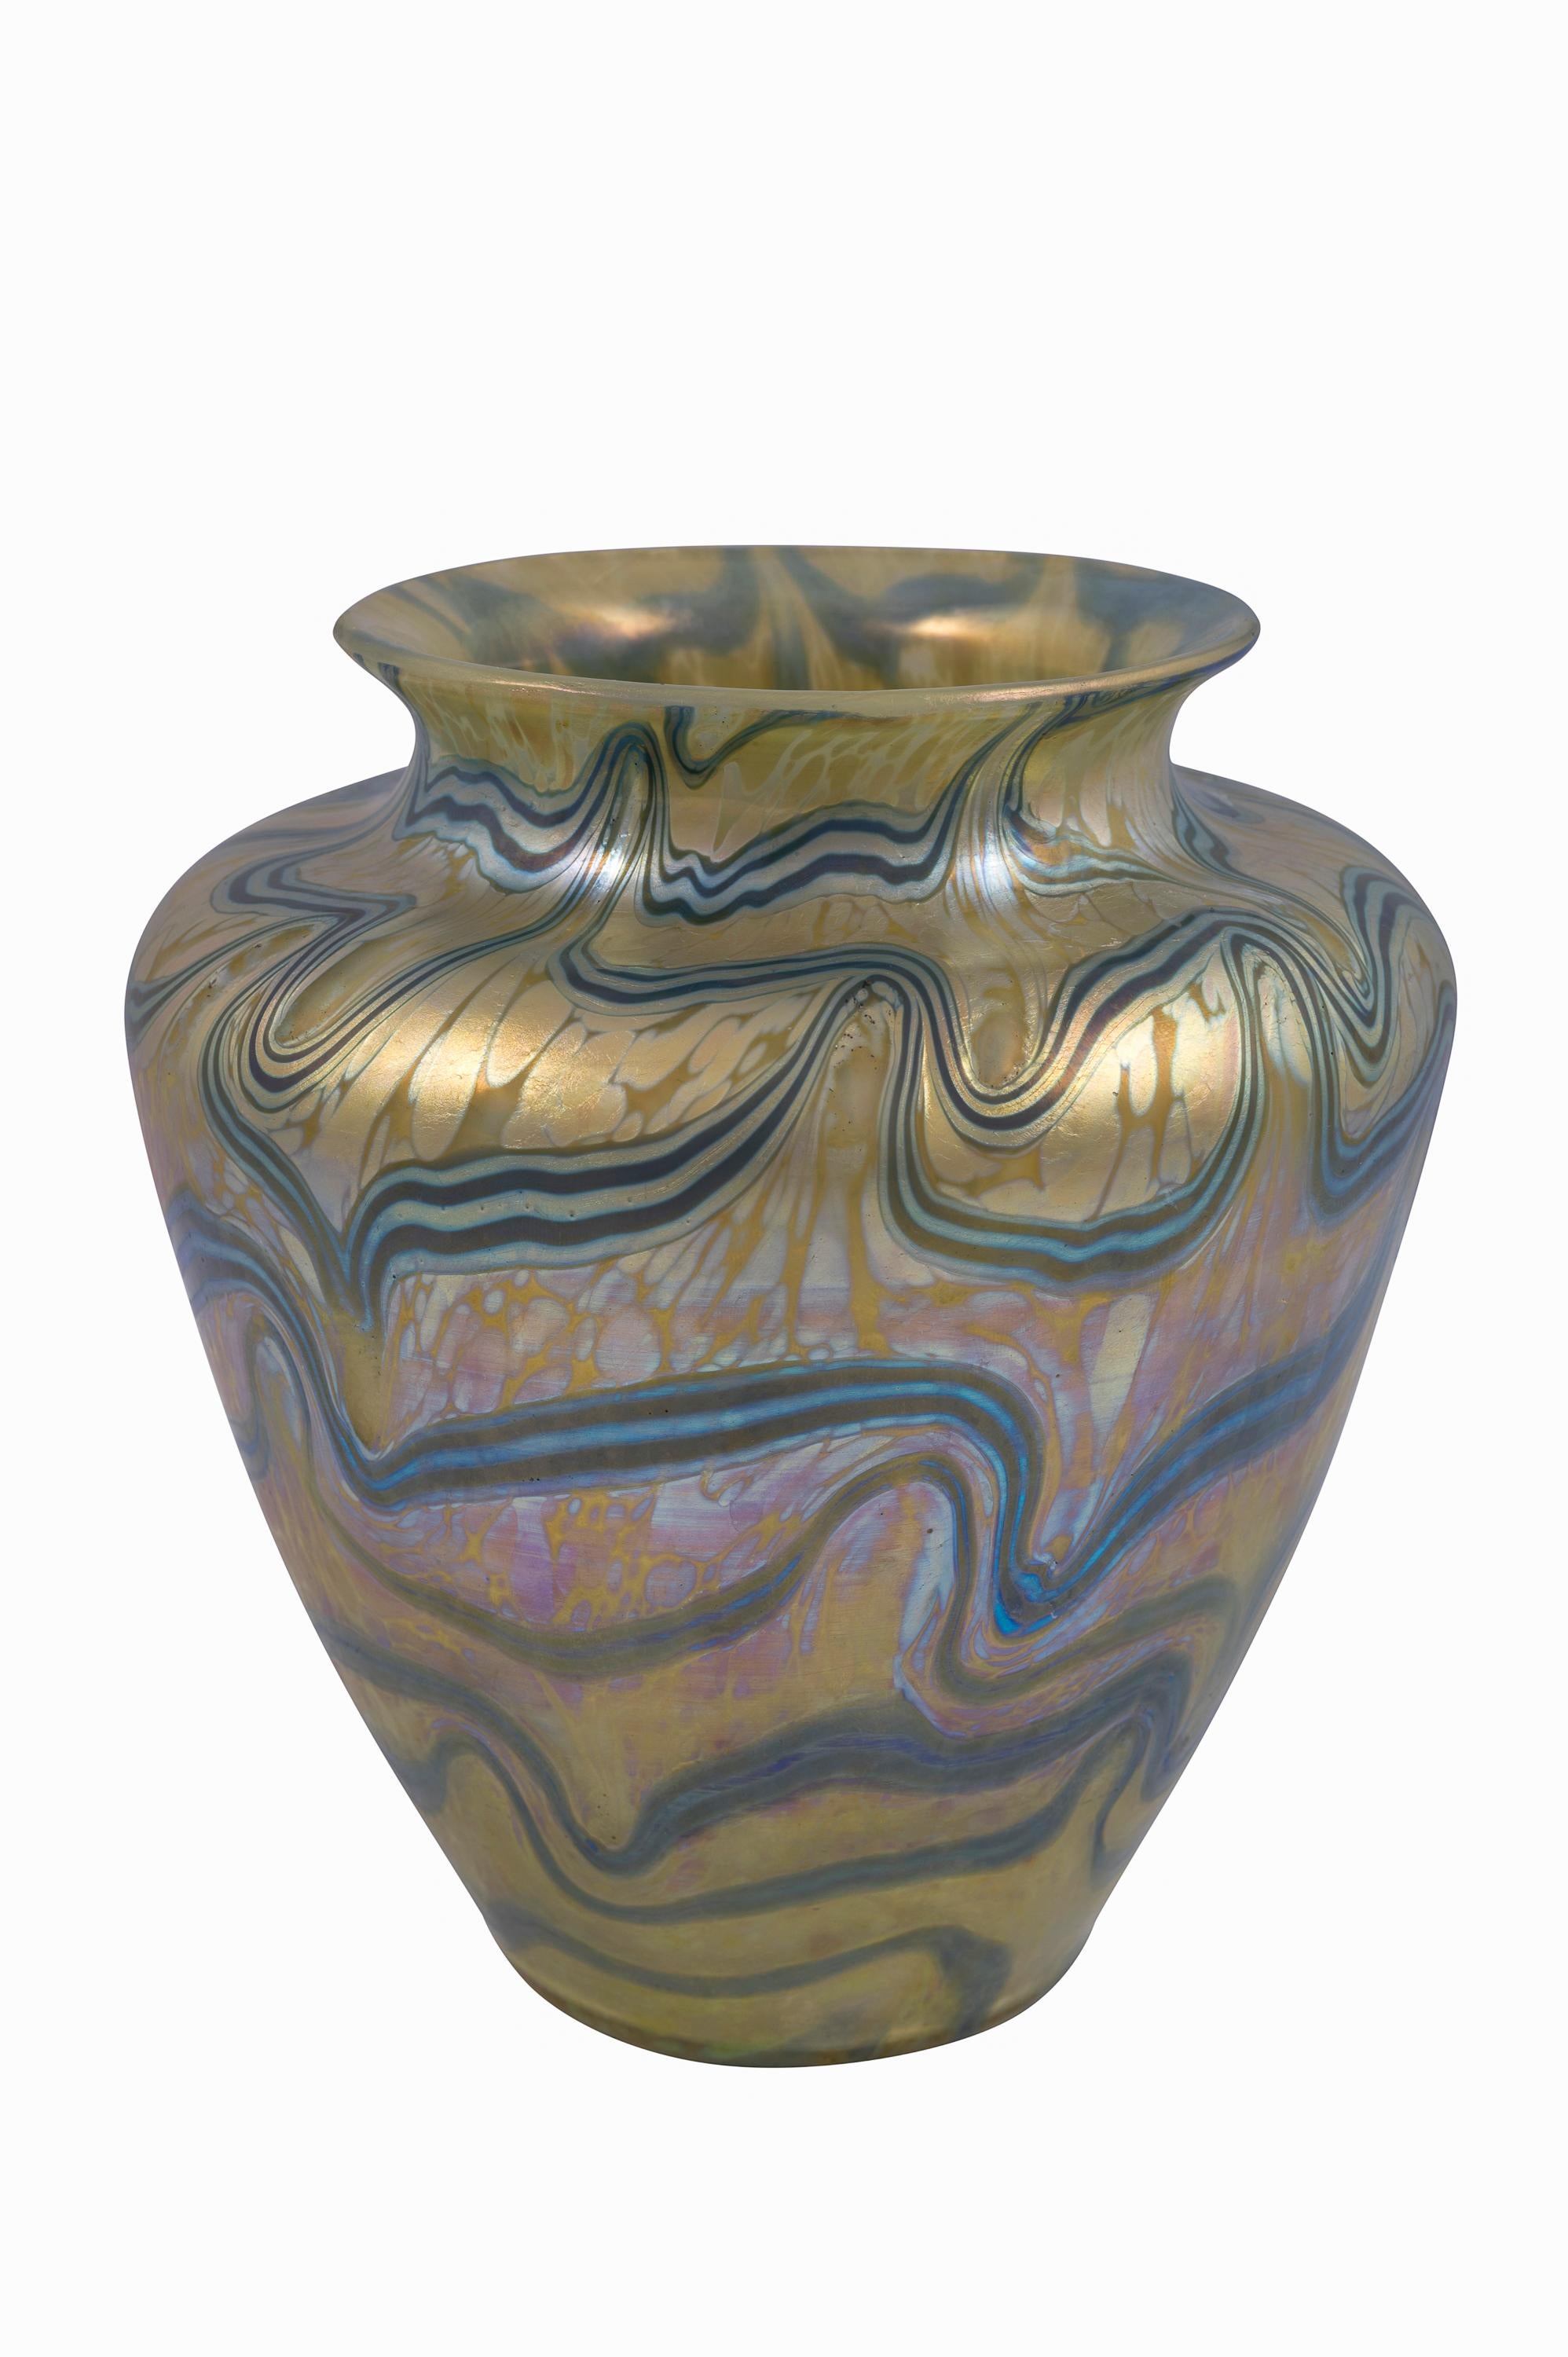 Glass vase, Johann Loetz Witwe, PG 1/104 , ca. 1901, signed, Art Nouveau, Jugendstil, Art Deco, art glass, iridescent glass, blue, gold

Technique: Glass, mold blown, free formed, reduced and iridescent

signed with 